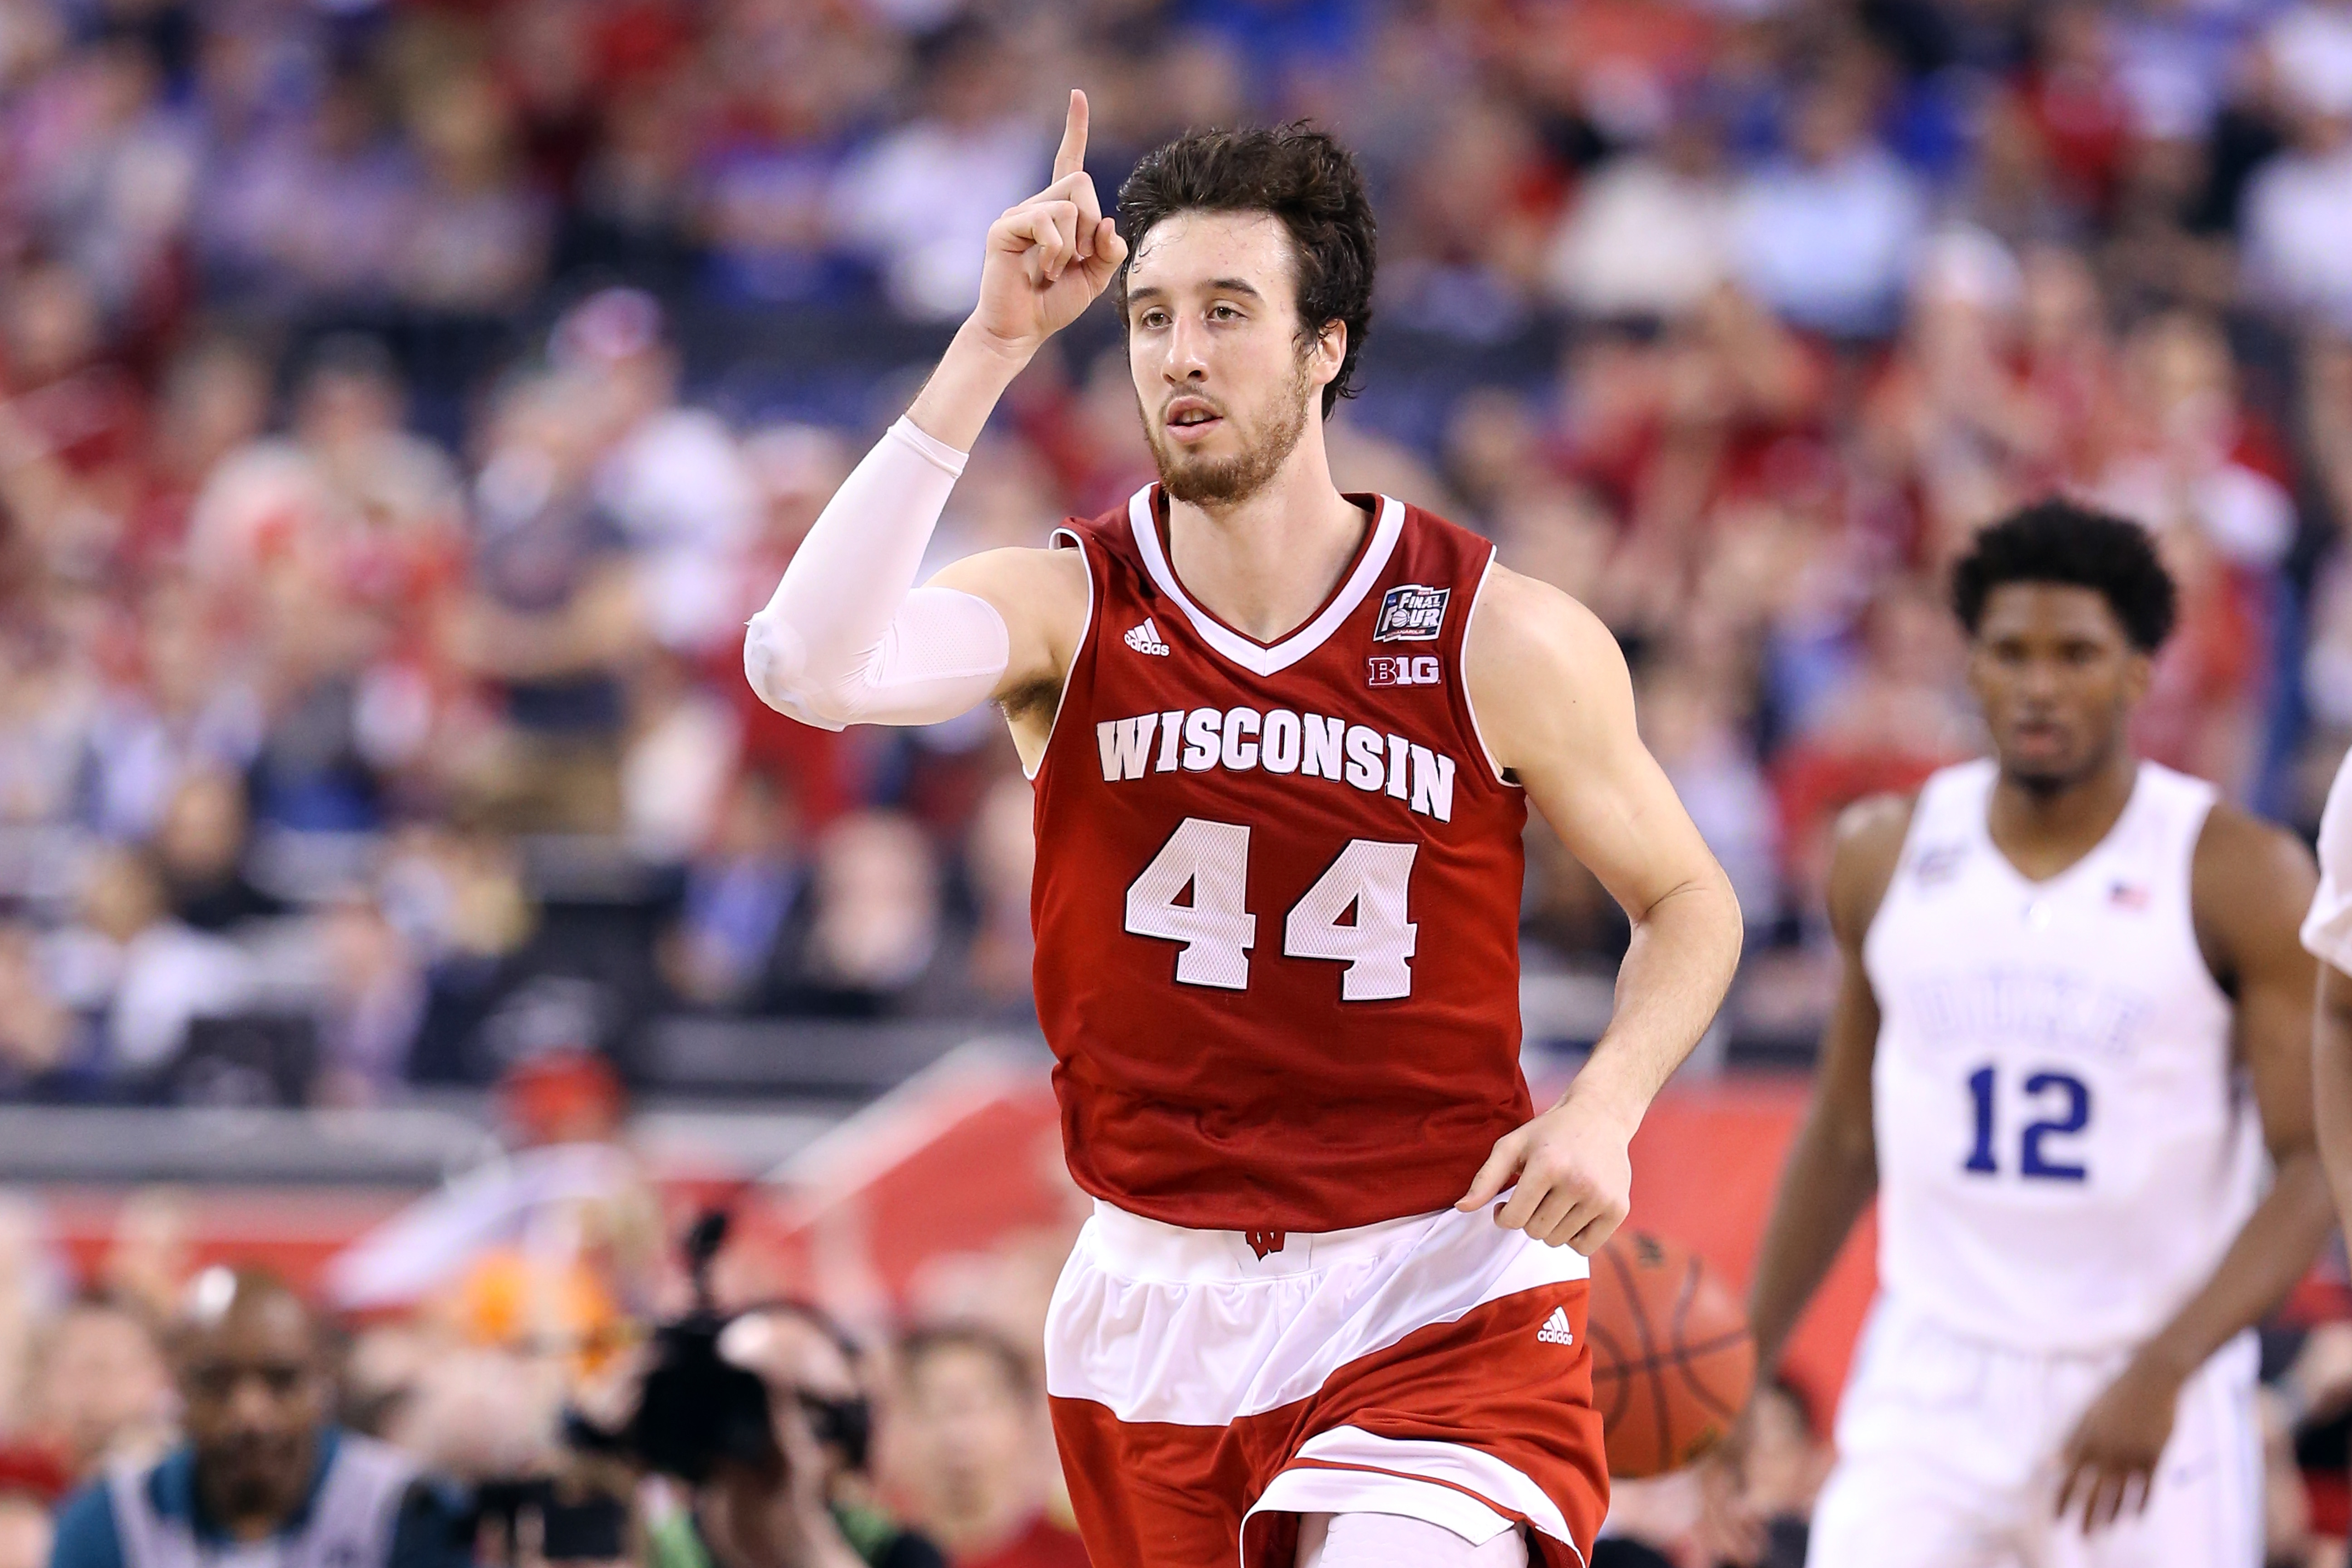 Frank Kaminsky to retire jersey at Wisconsin Badgers game